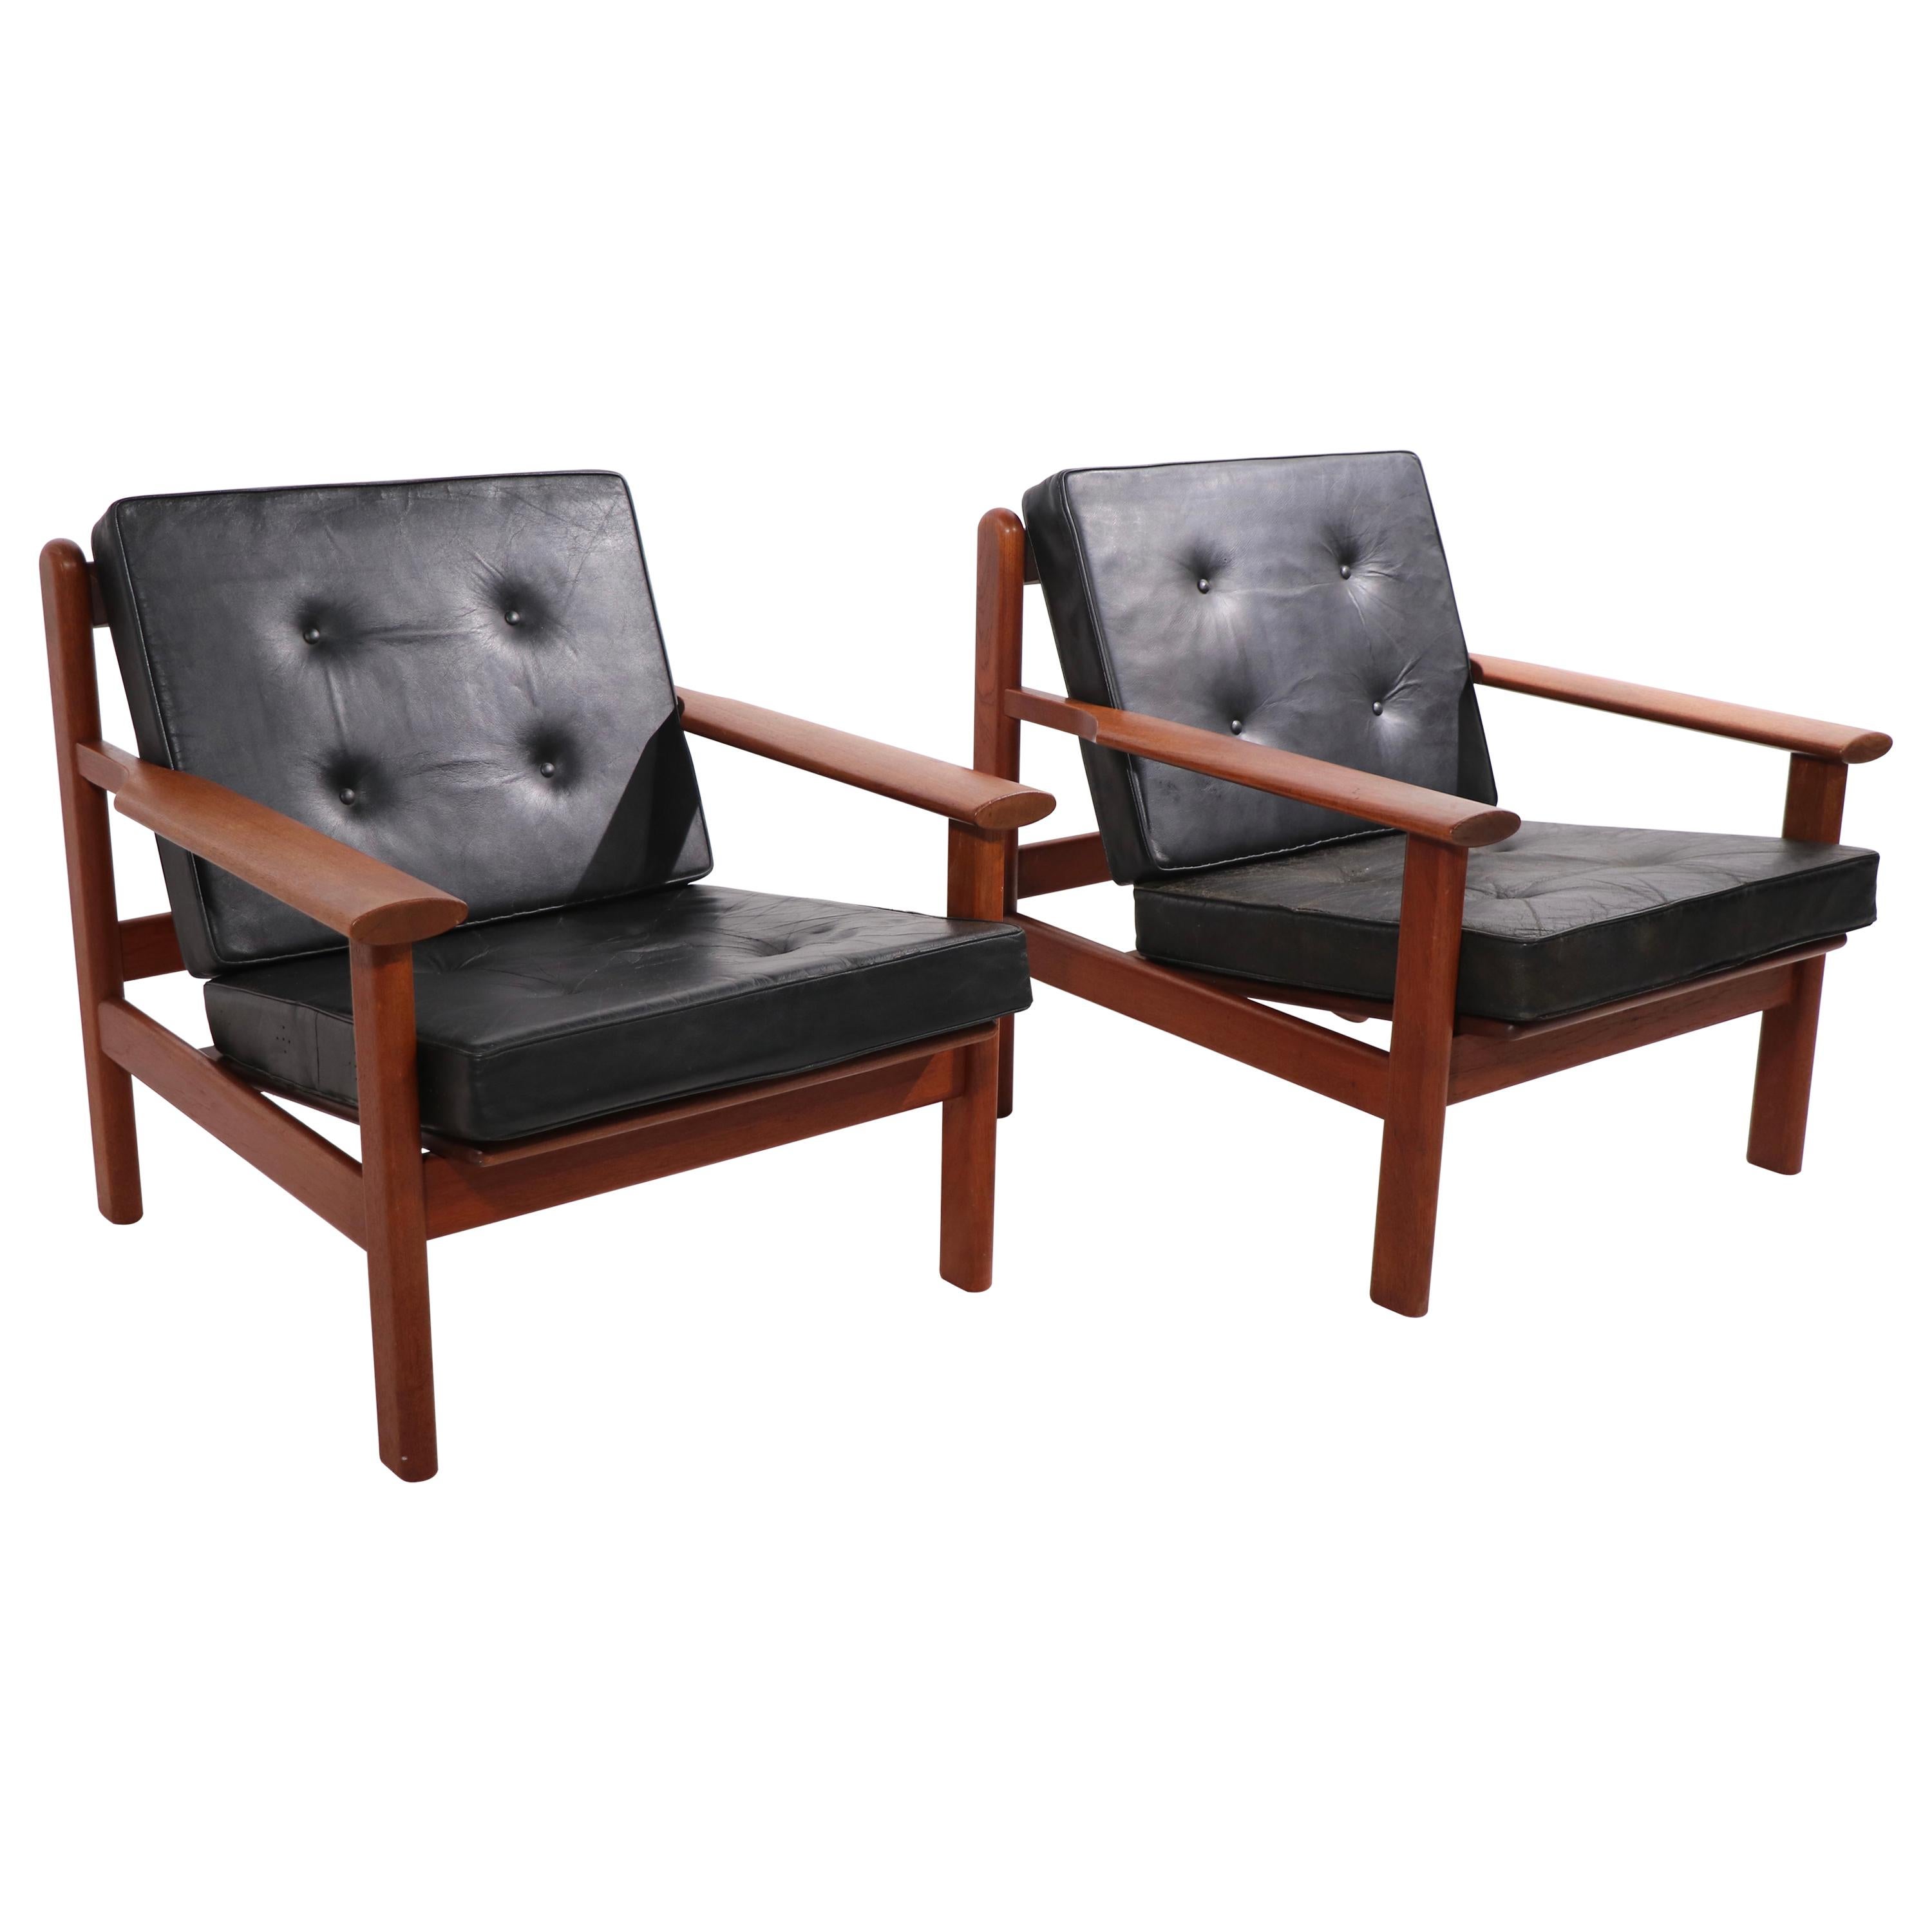 Pair of Danish Modern Lounge Chairs by Poul Volther for Frem Rolje